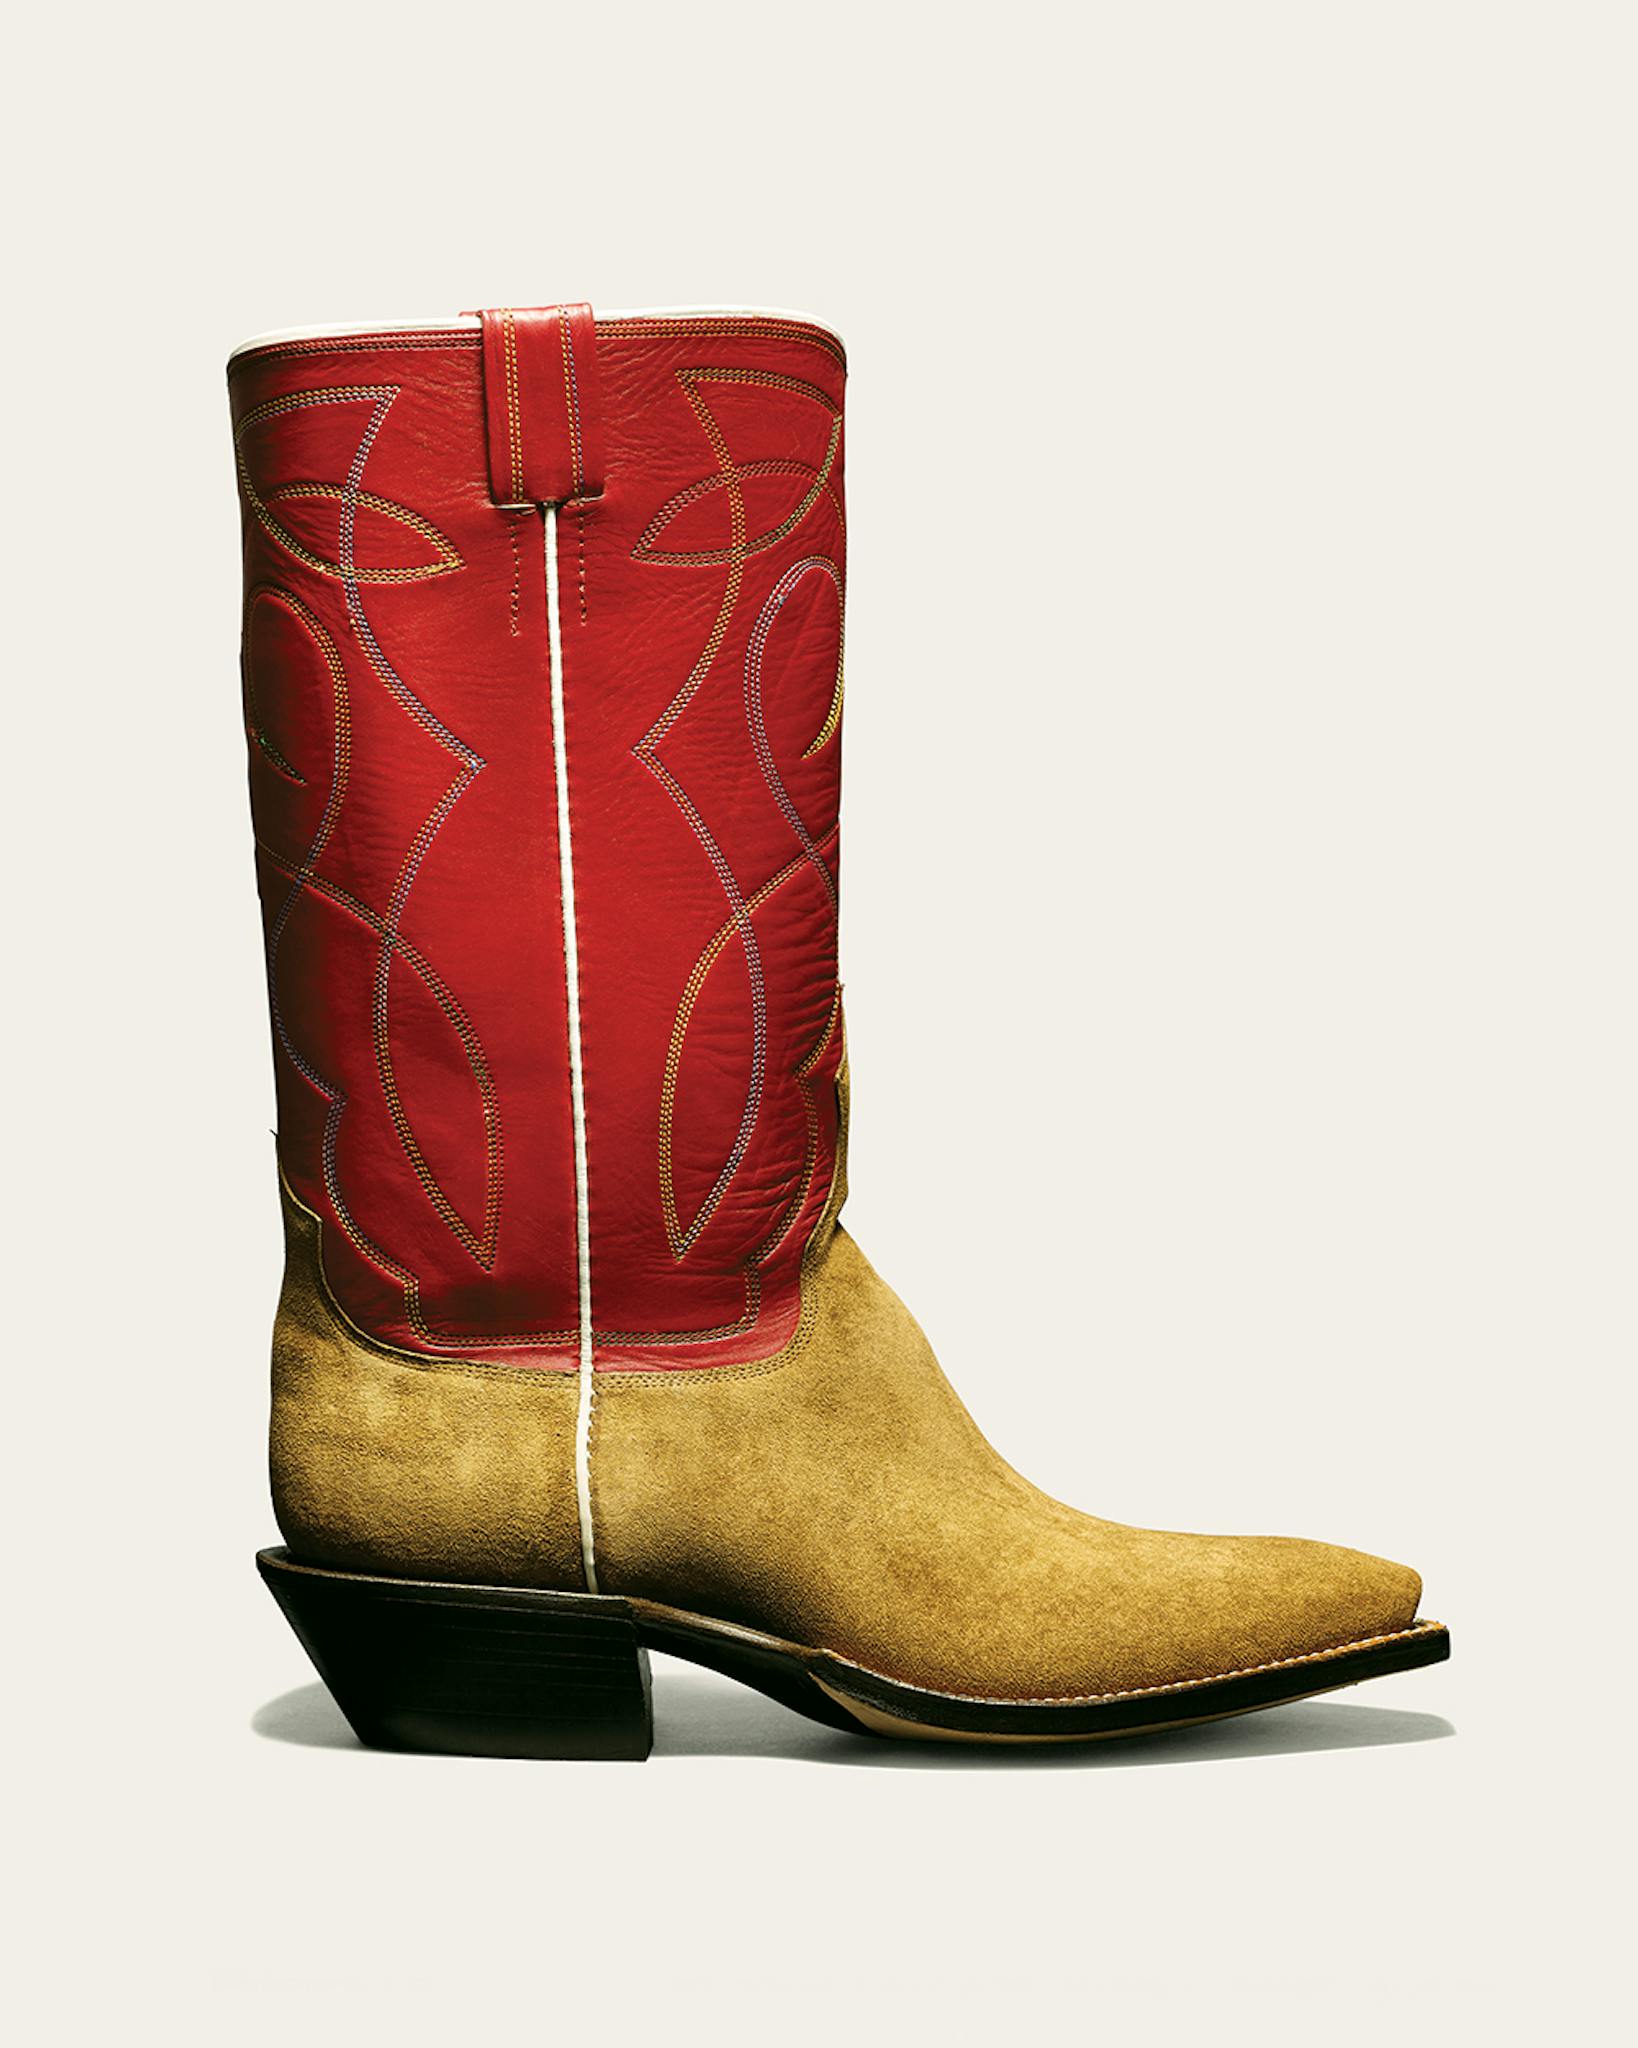 B. B. Leather Shop boot with red shaft.